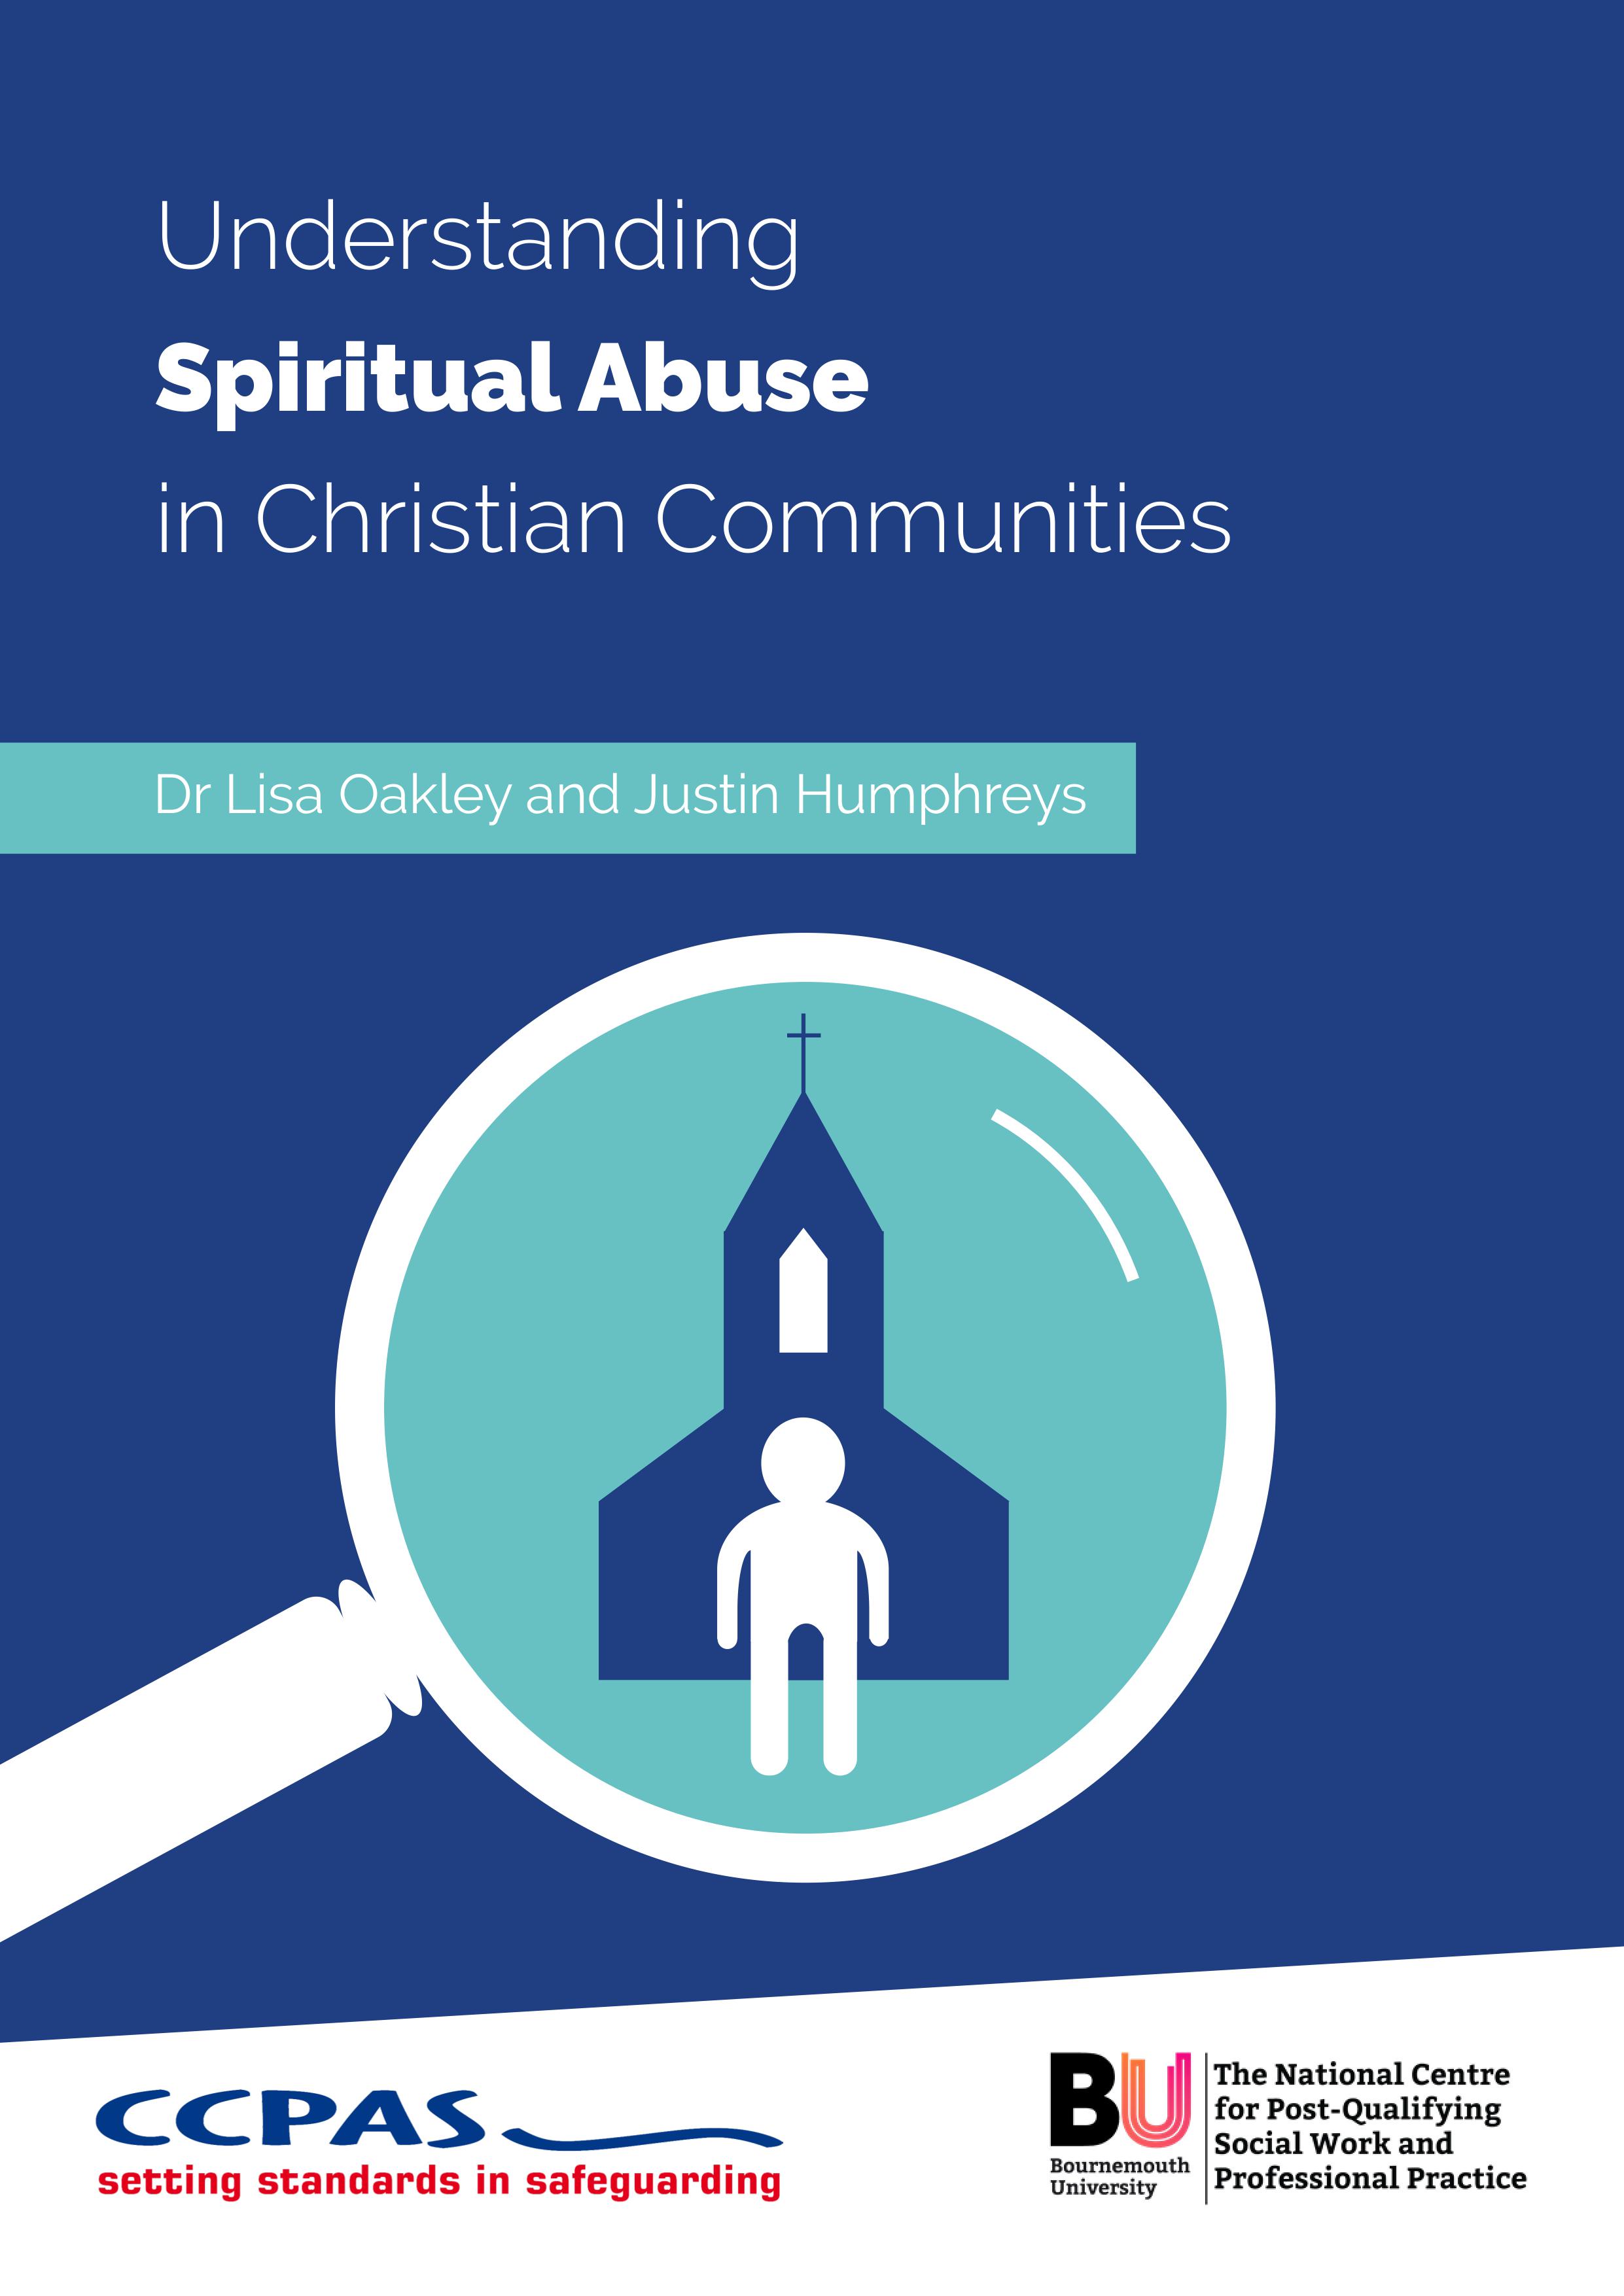 Front cover of Understanding Spiritual Abuse in Christian Communities.